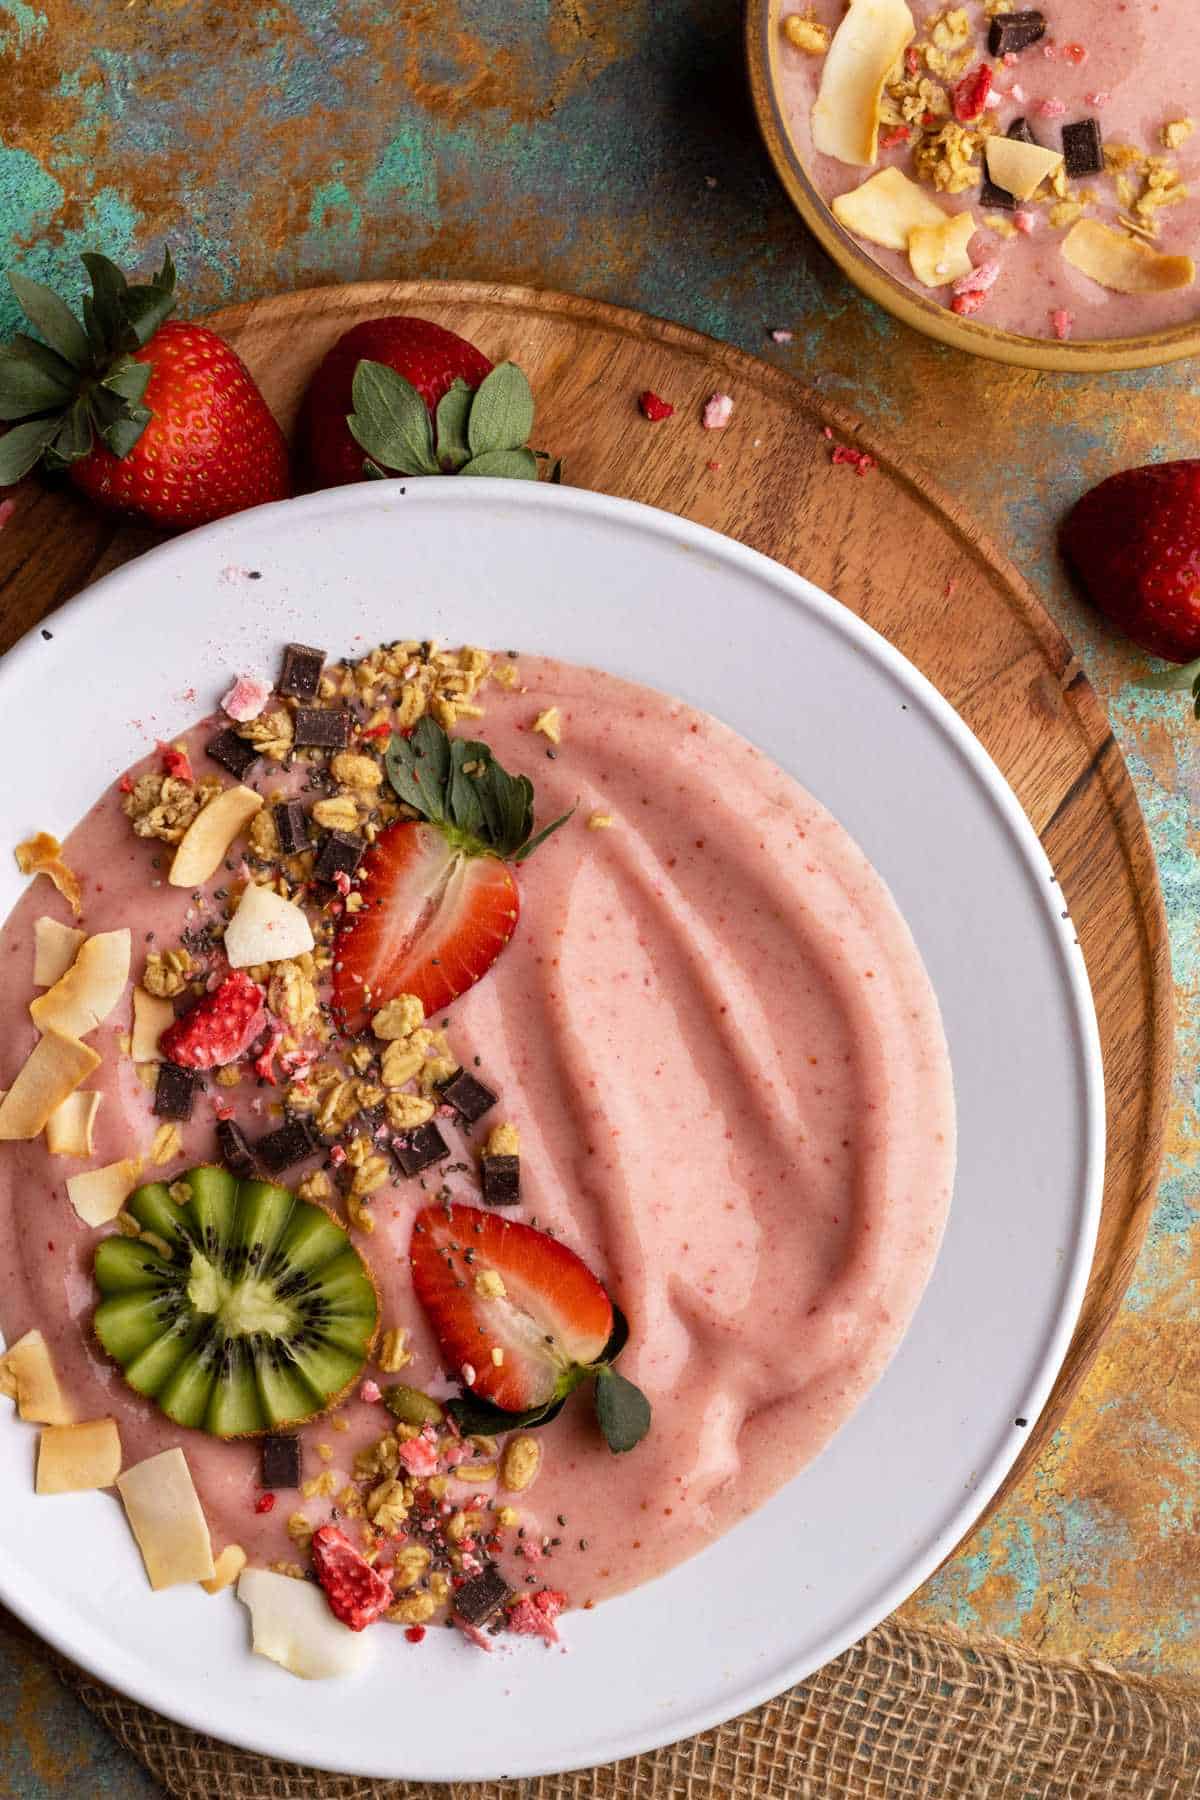 Strawberry smoothie bowl with fresh fruit and other toppings overhead.